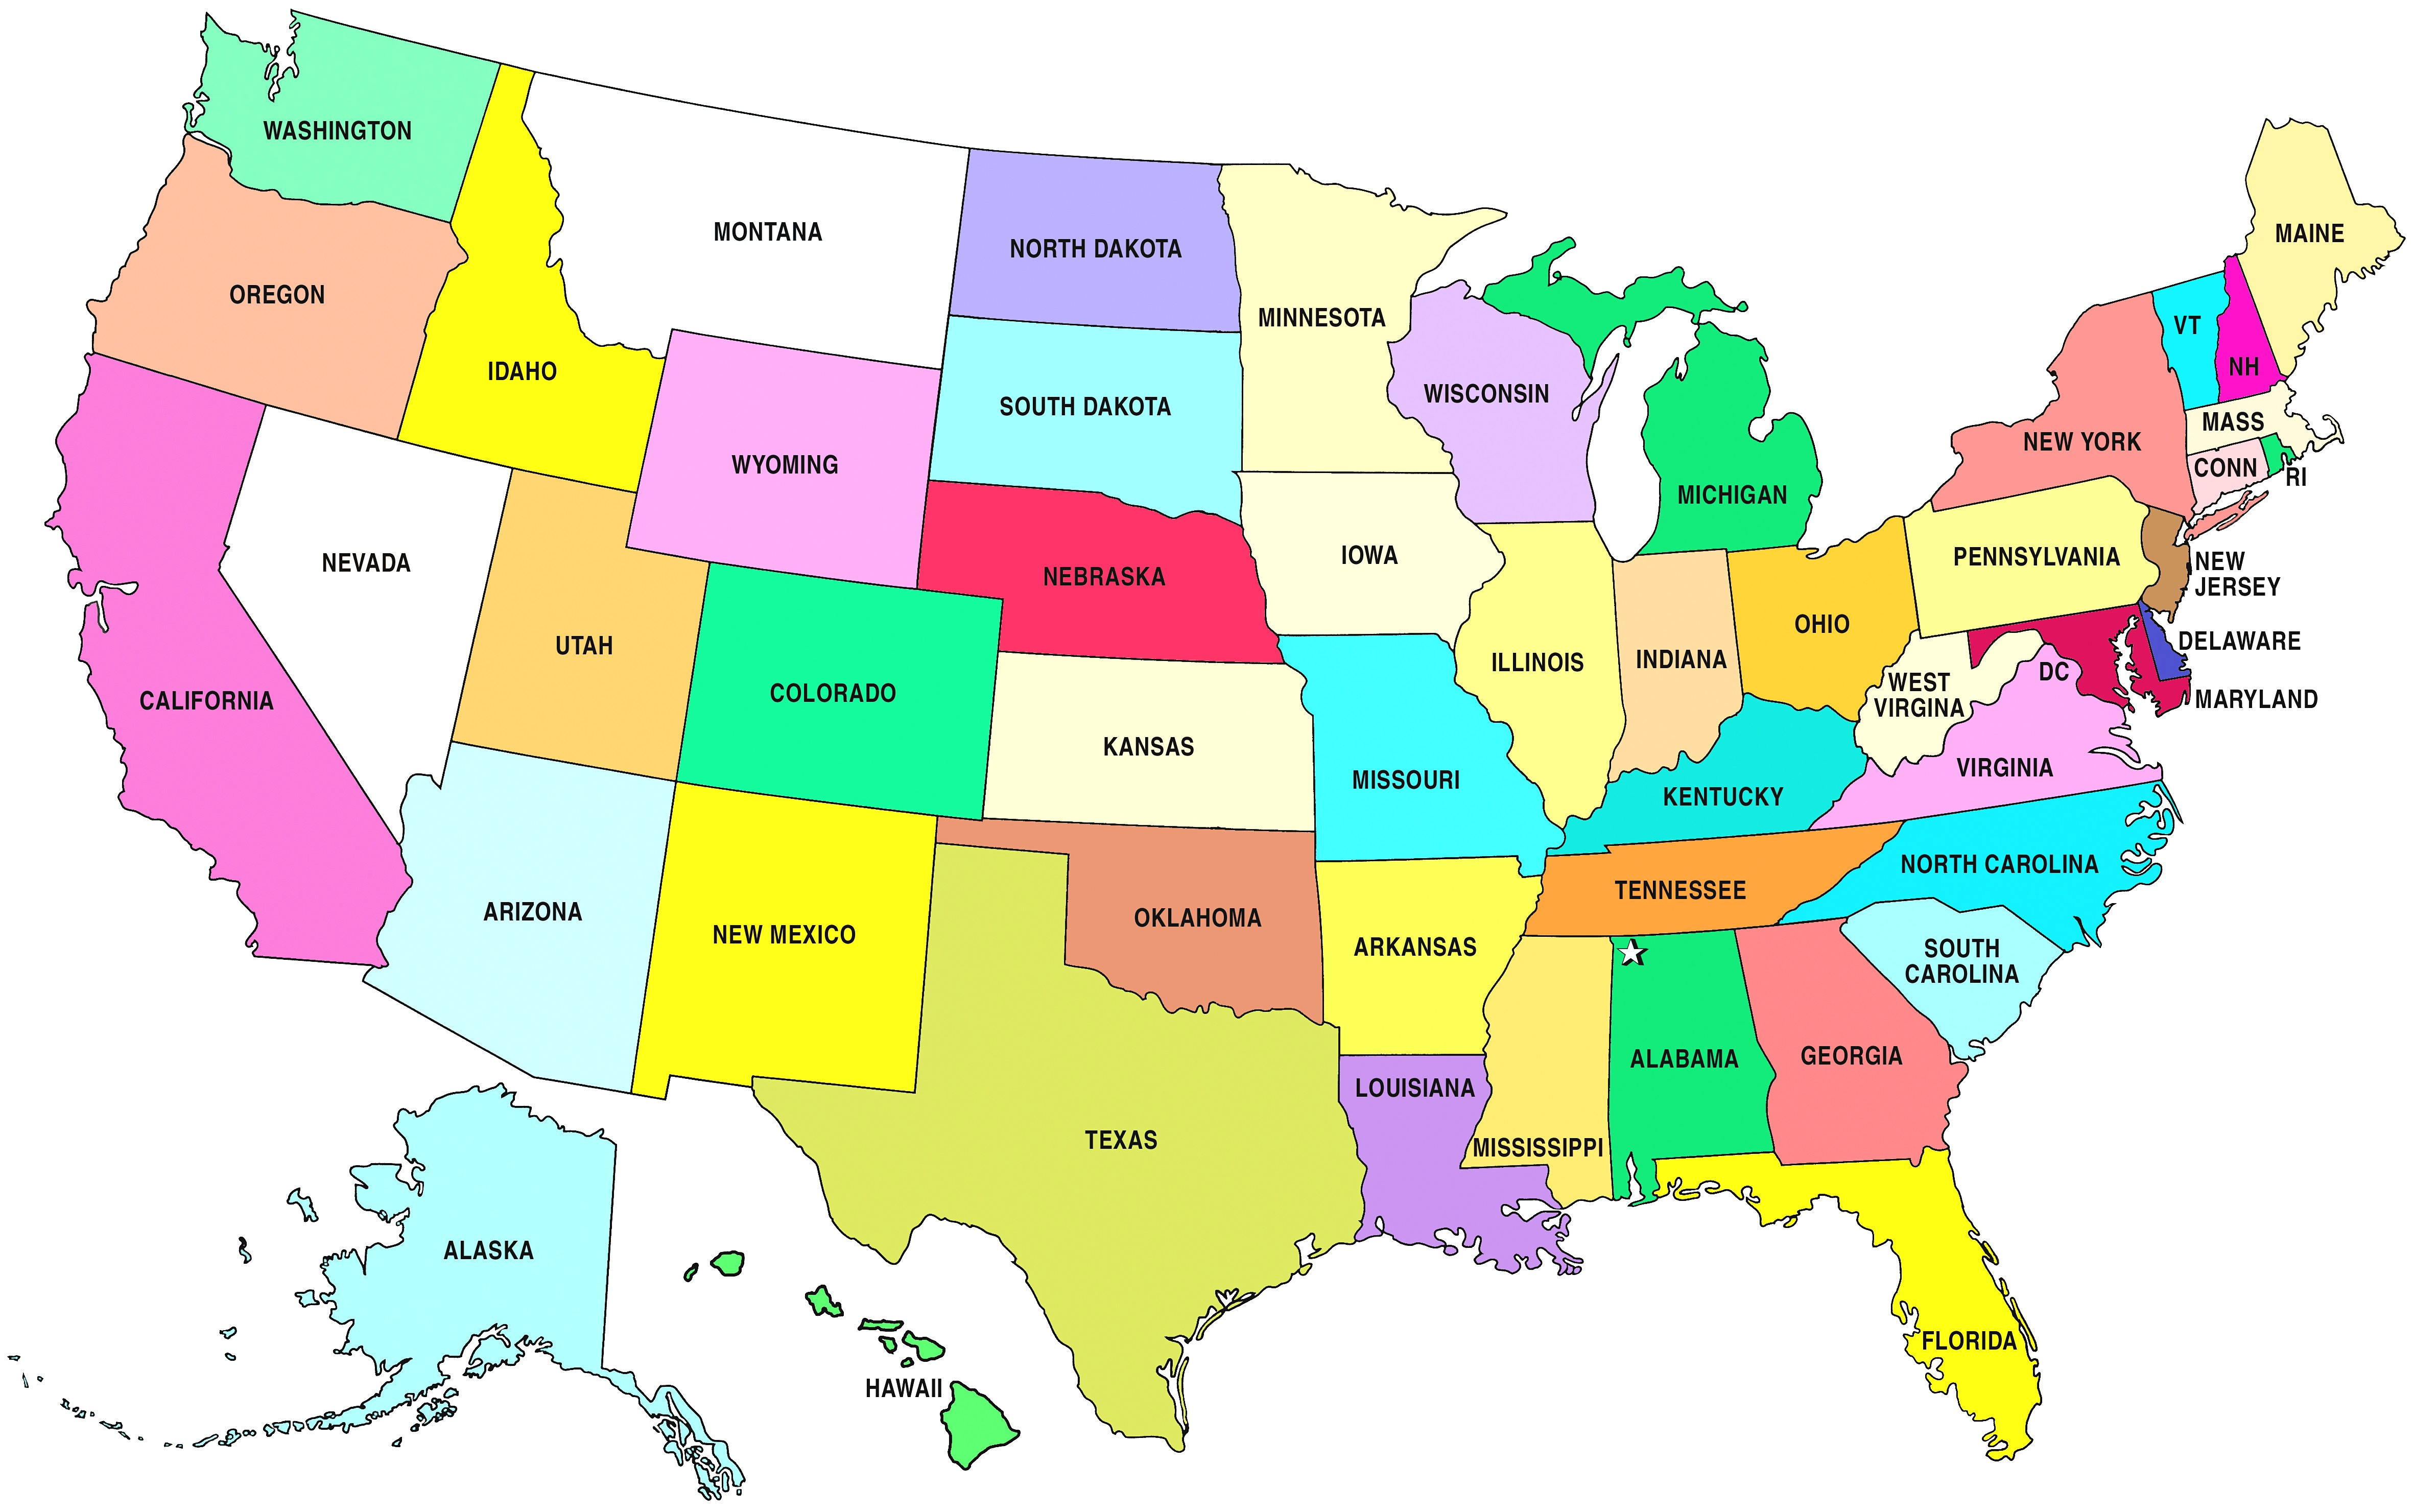 Free Printable Labeled Map Of The United States Free Printable